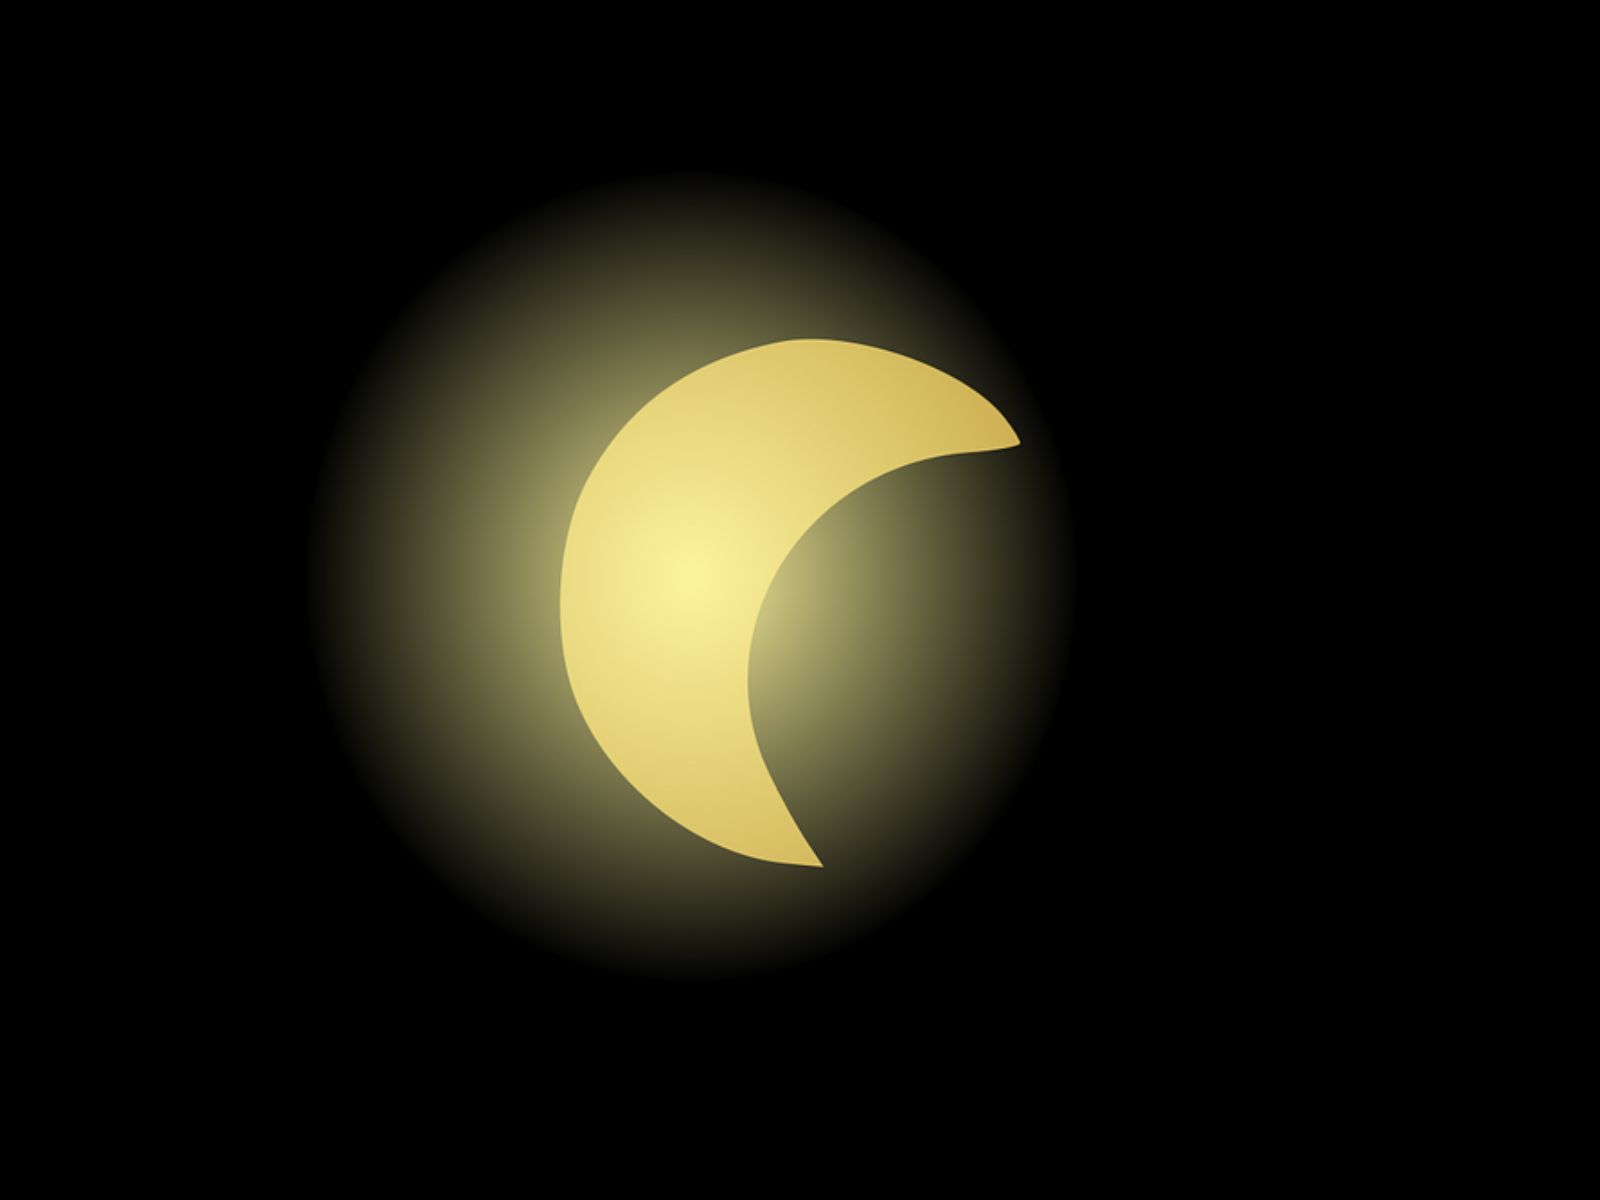 See October's Eclipse (safely!) - Manitoba Museum